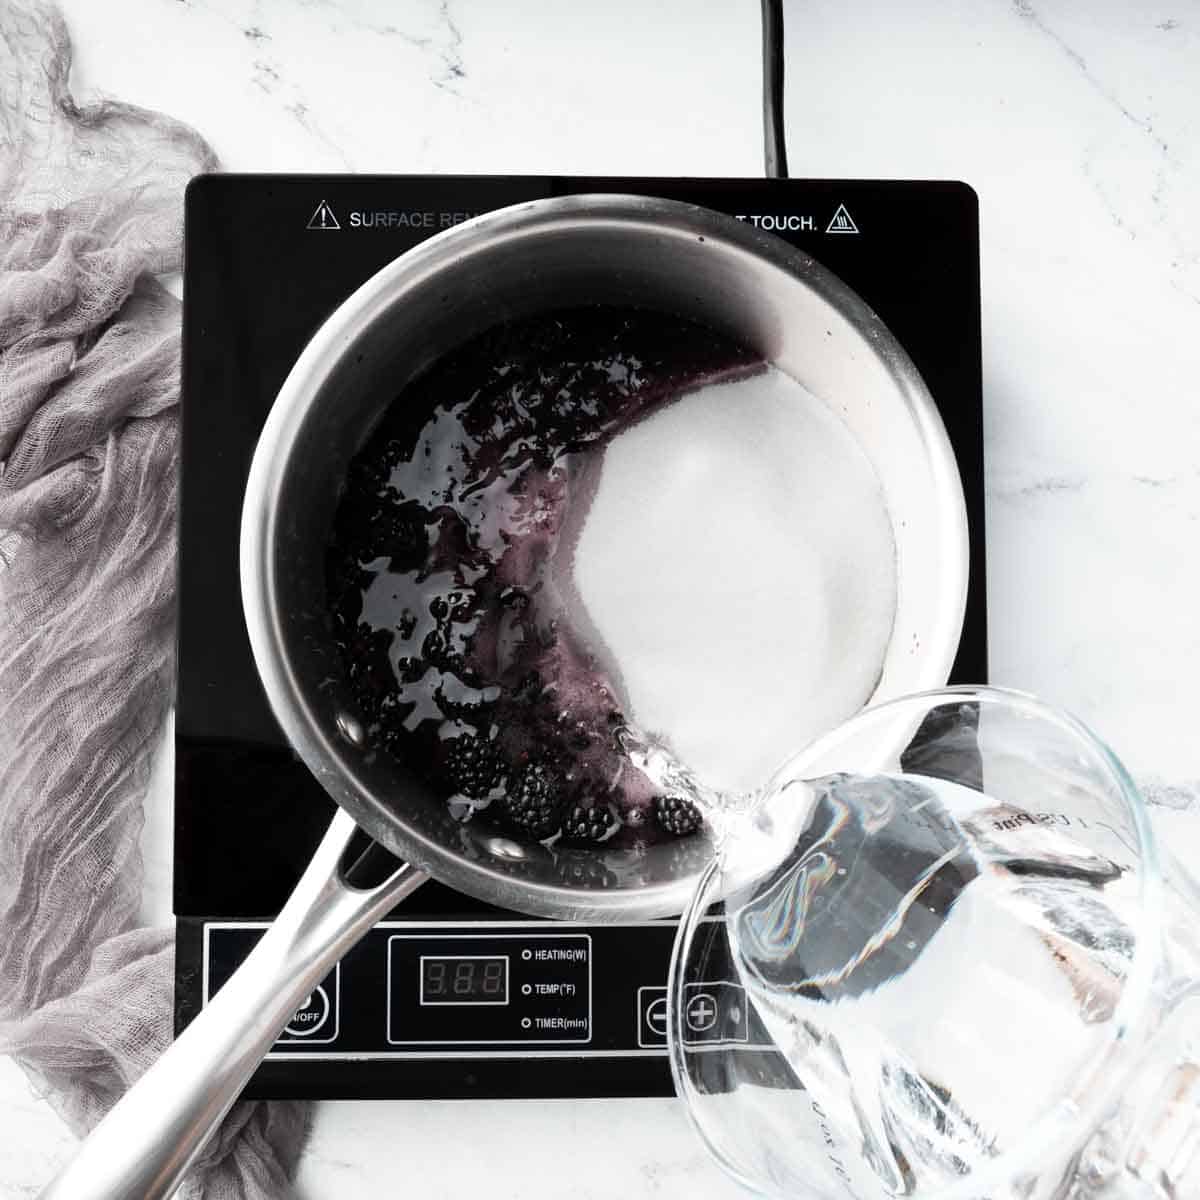 Pouring granulated sugar and water over the blackberries on the pot